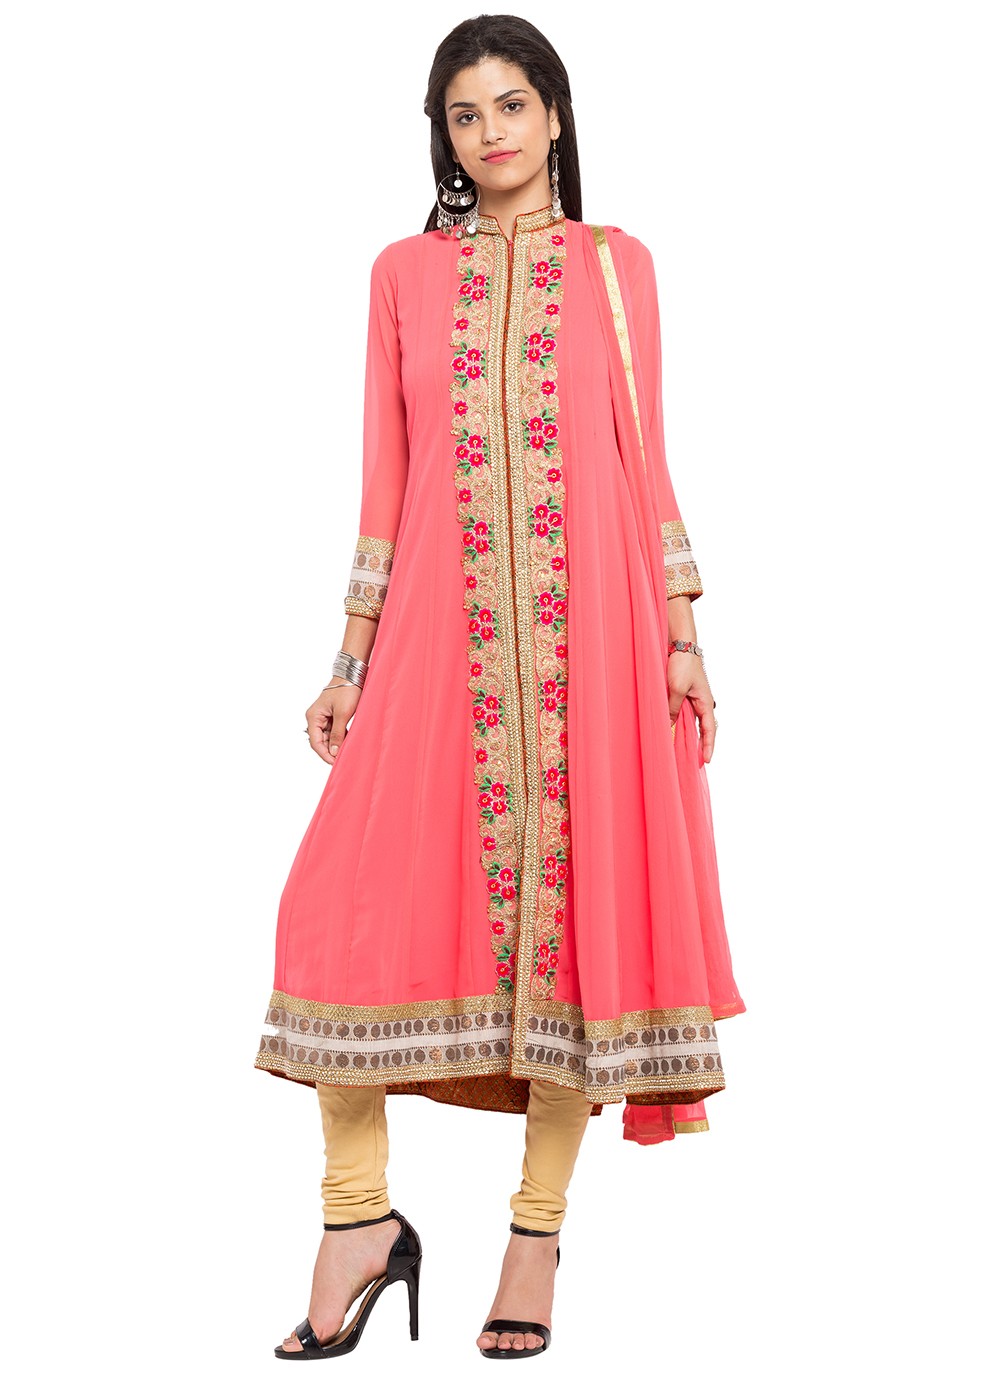 Embroidered Faux Georgette Readymade Anarkali Salwar Suit in Pink